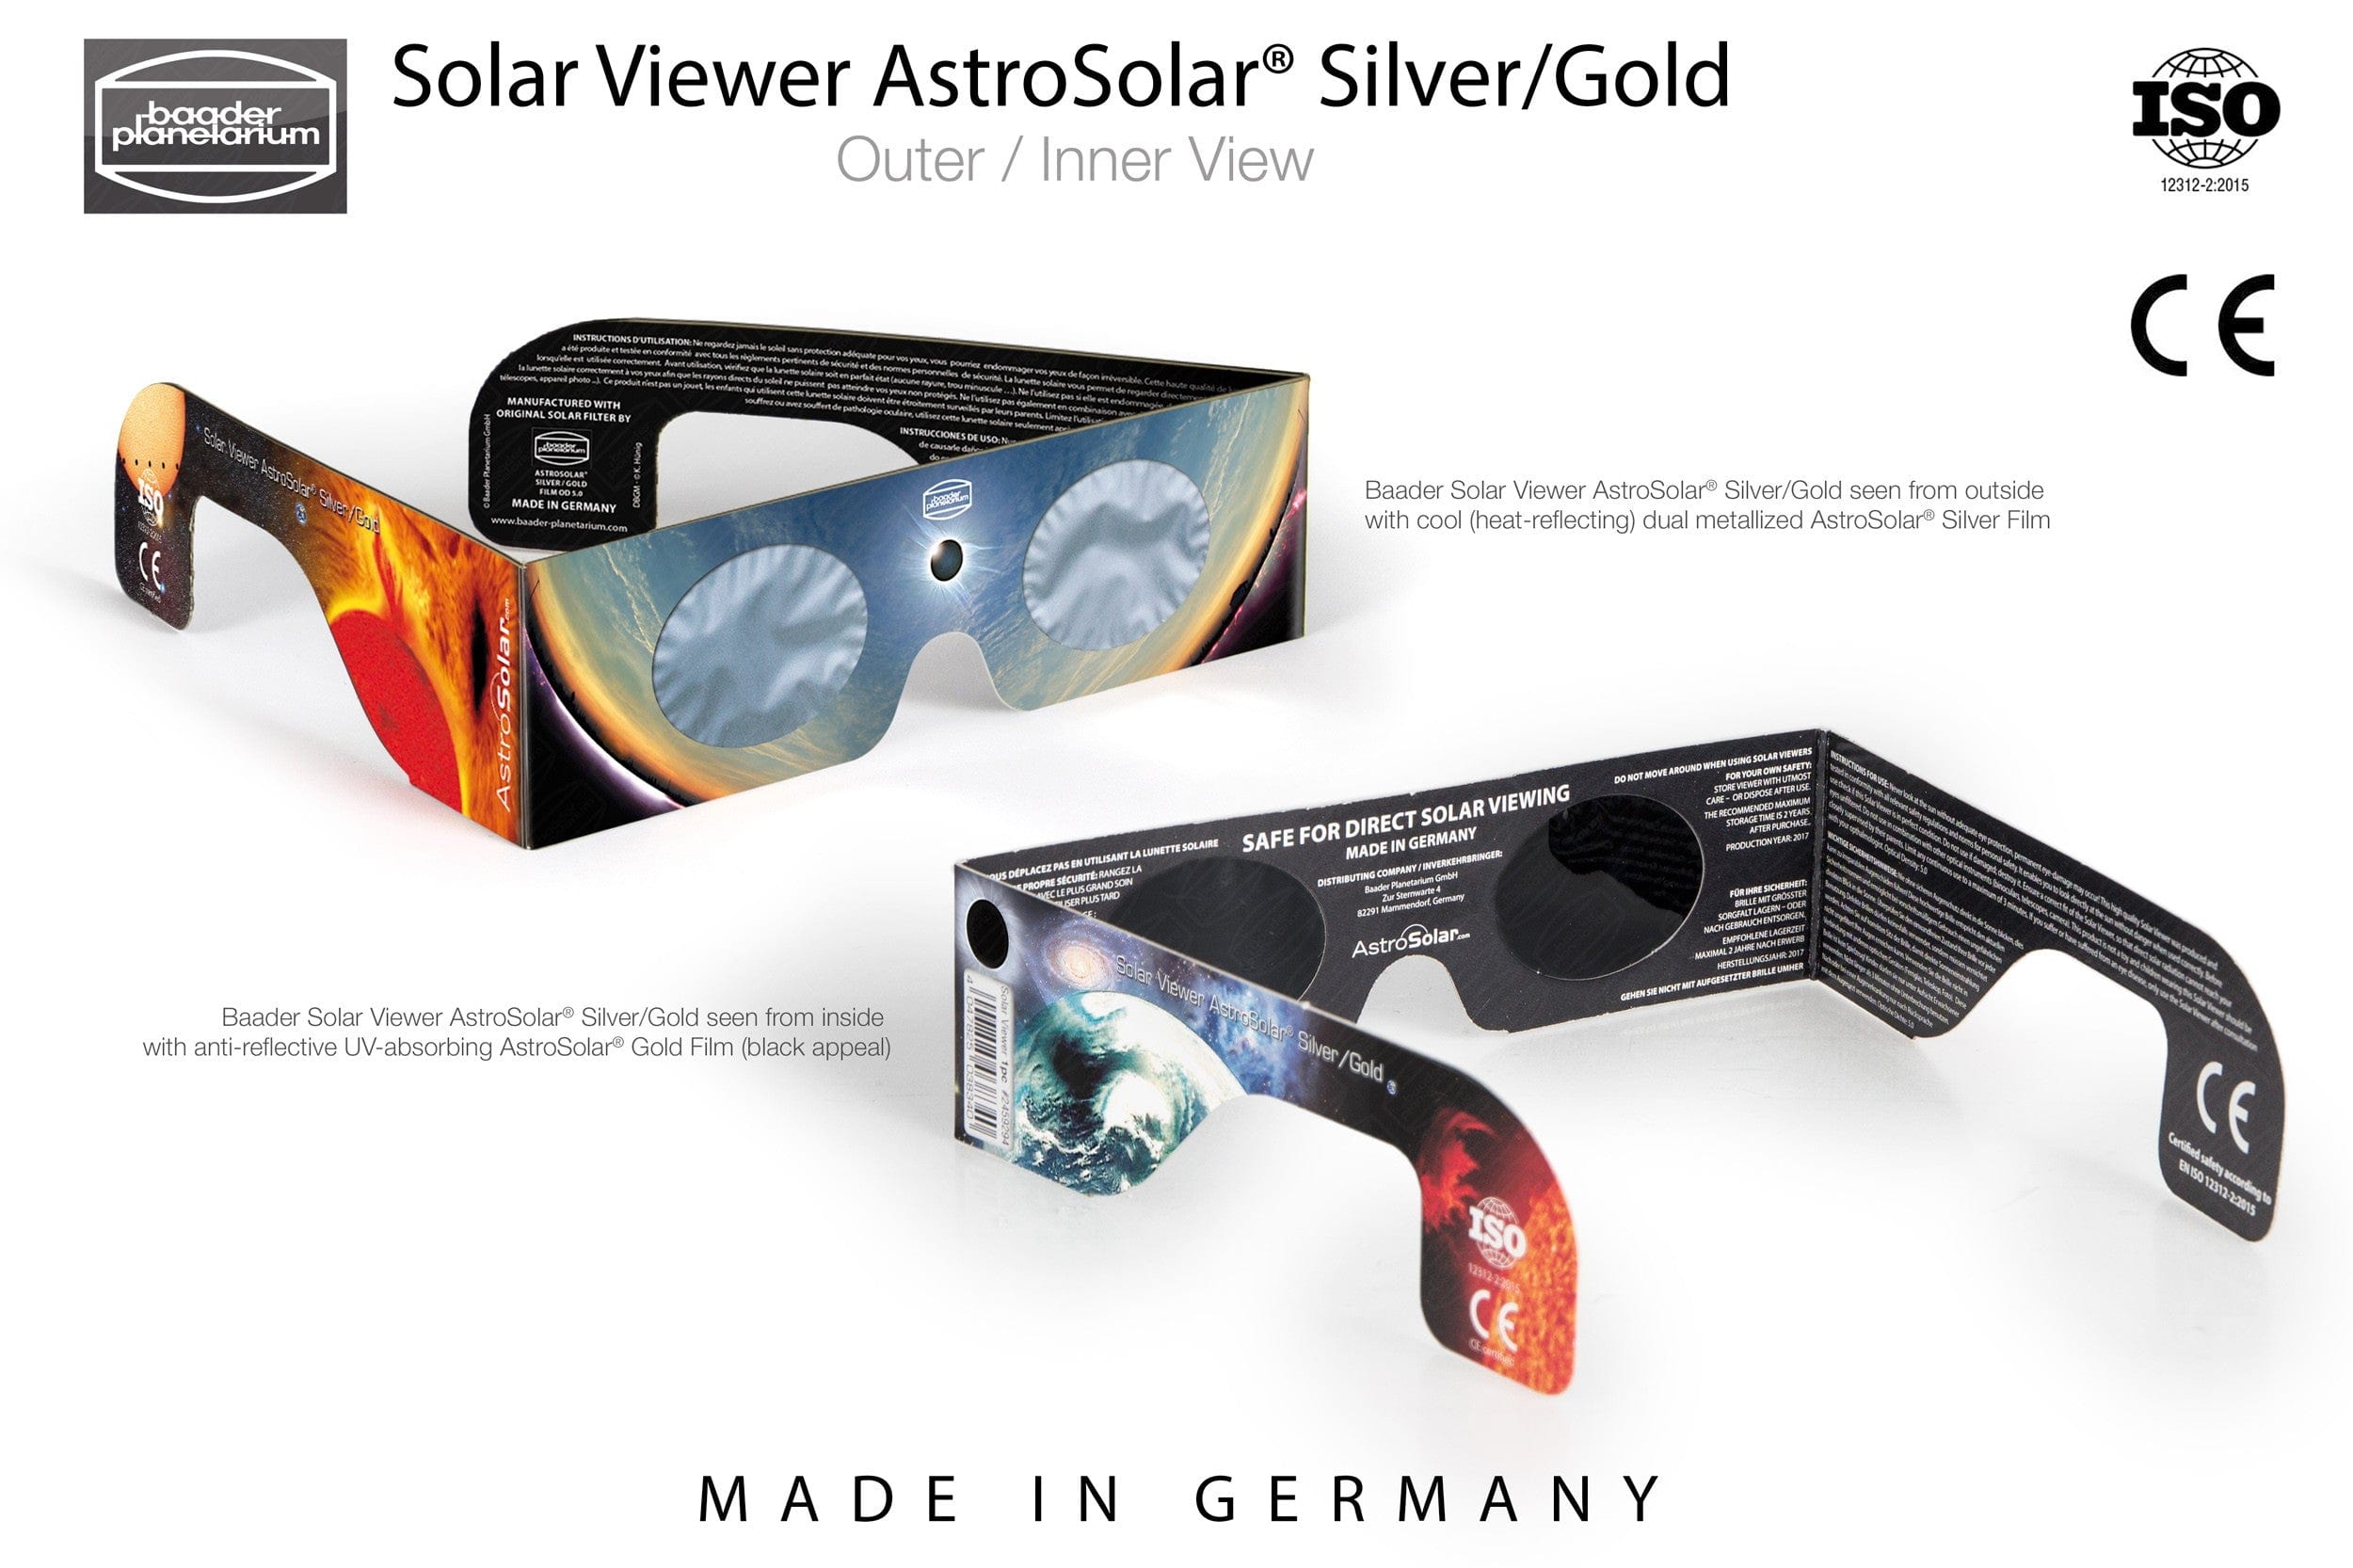 Baader Planetarium Accessory Baader Solar Viewer AstroSolar® Silver/Gold Eclipse Glasses (single piece packaging) - 2459294